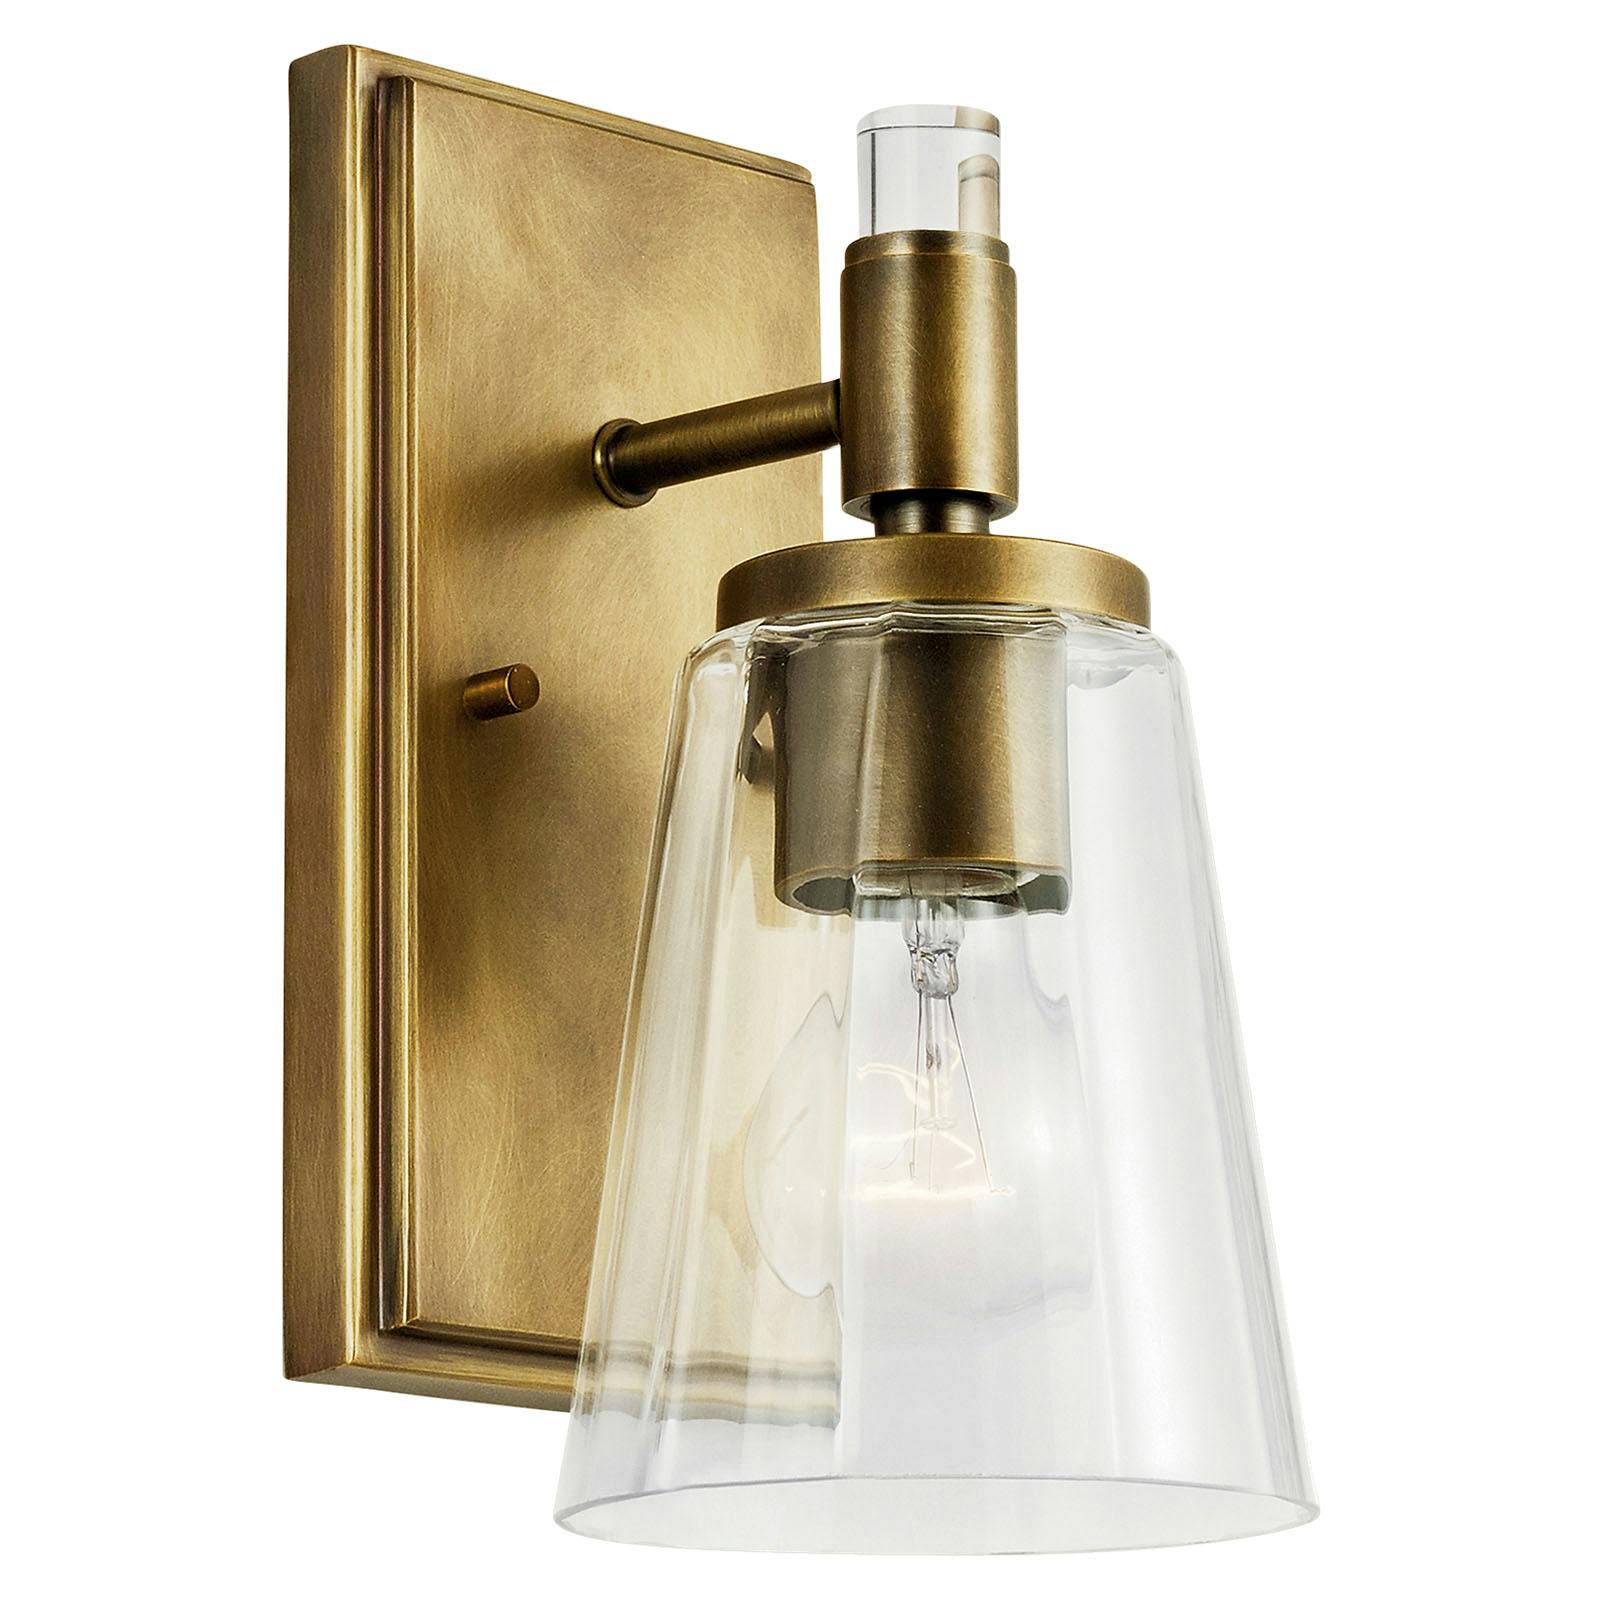 The Audrea™ 1 Light Wall Sconce Natural Brass facing down on a white background